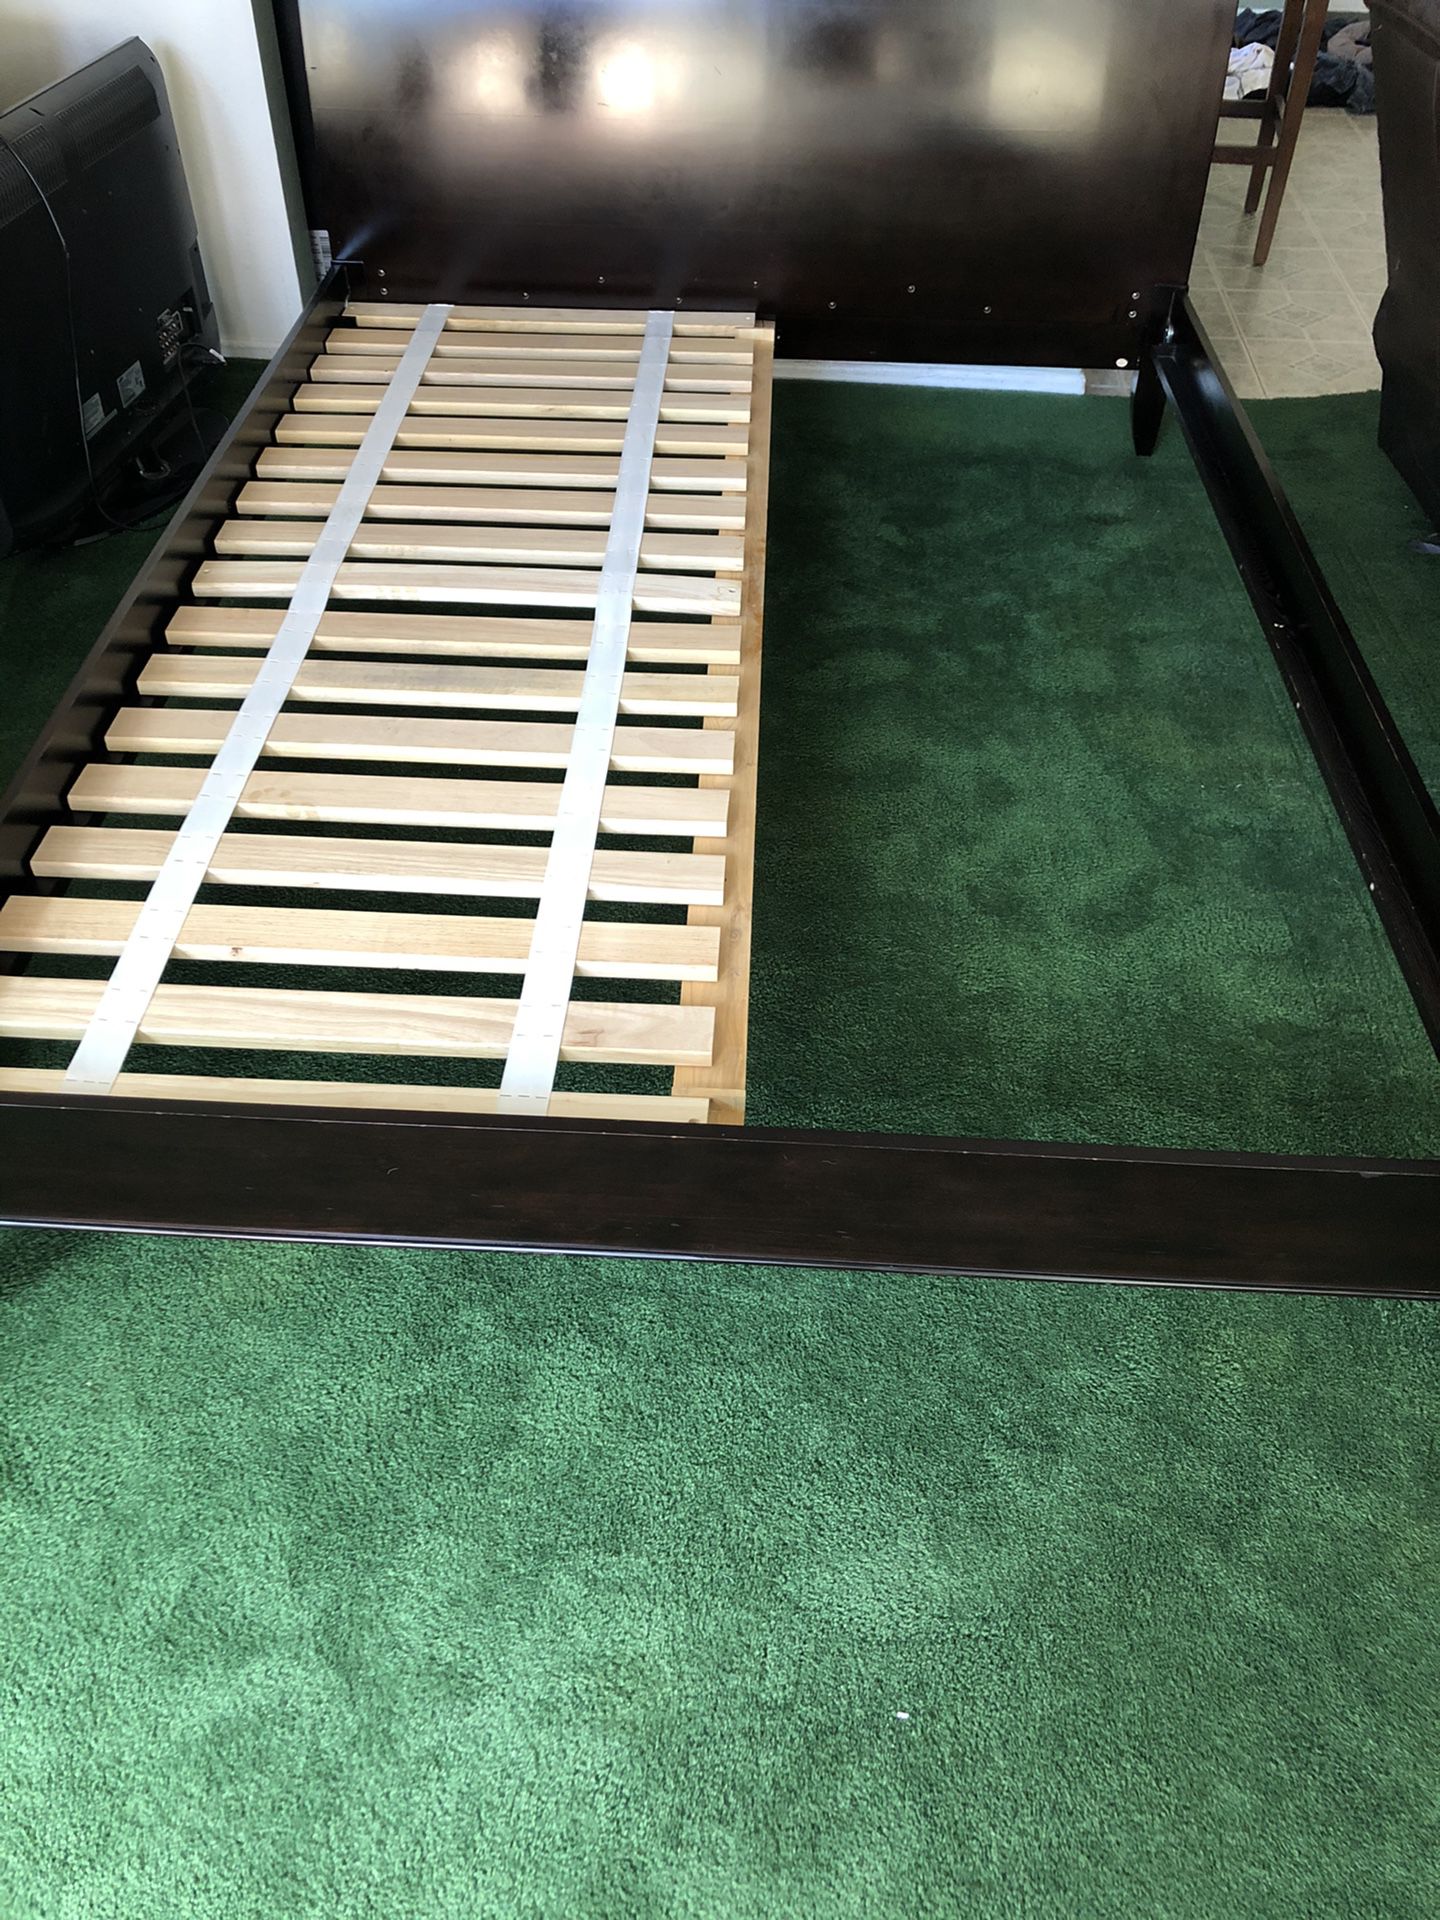 Crate and Barrel queen bed frame